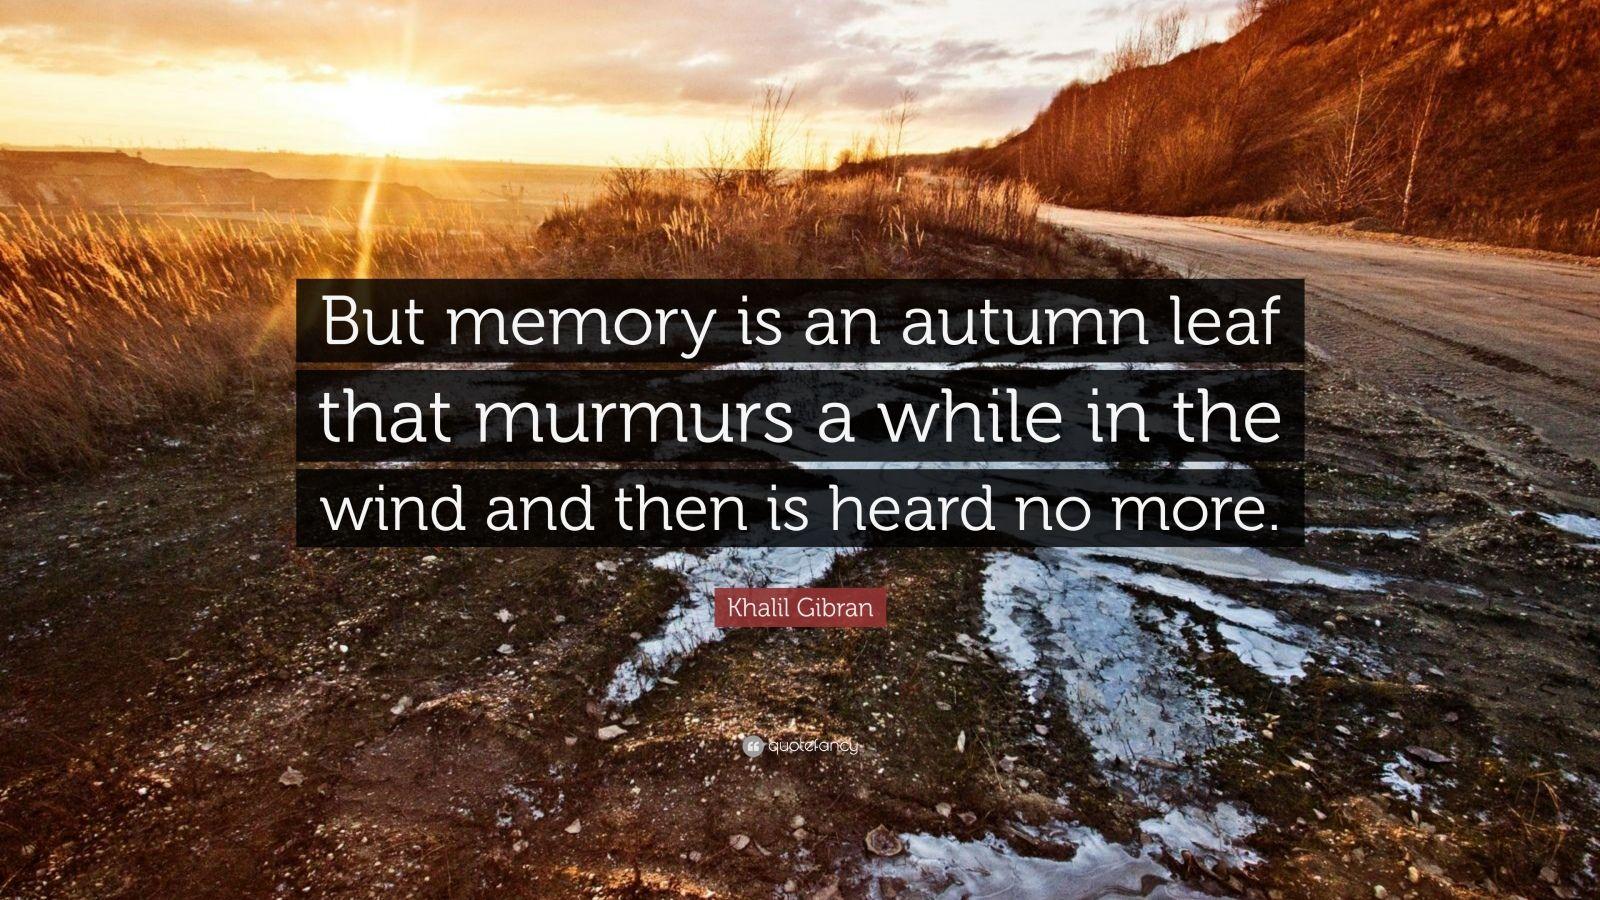 Khalil Gibran Quote: “But memory is an autumn leaf that